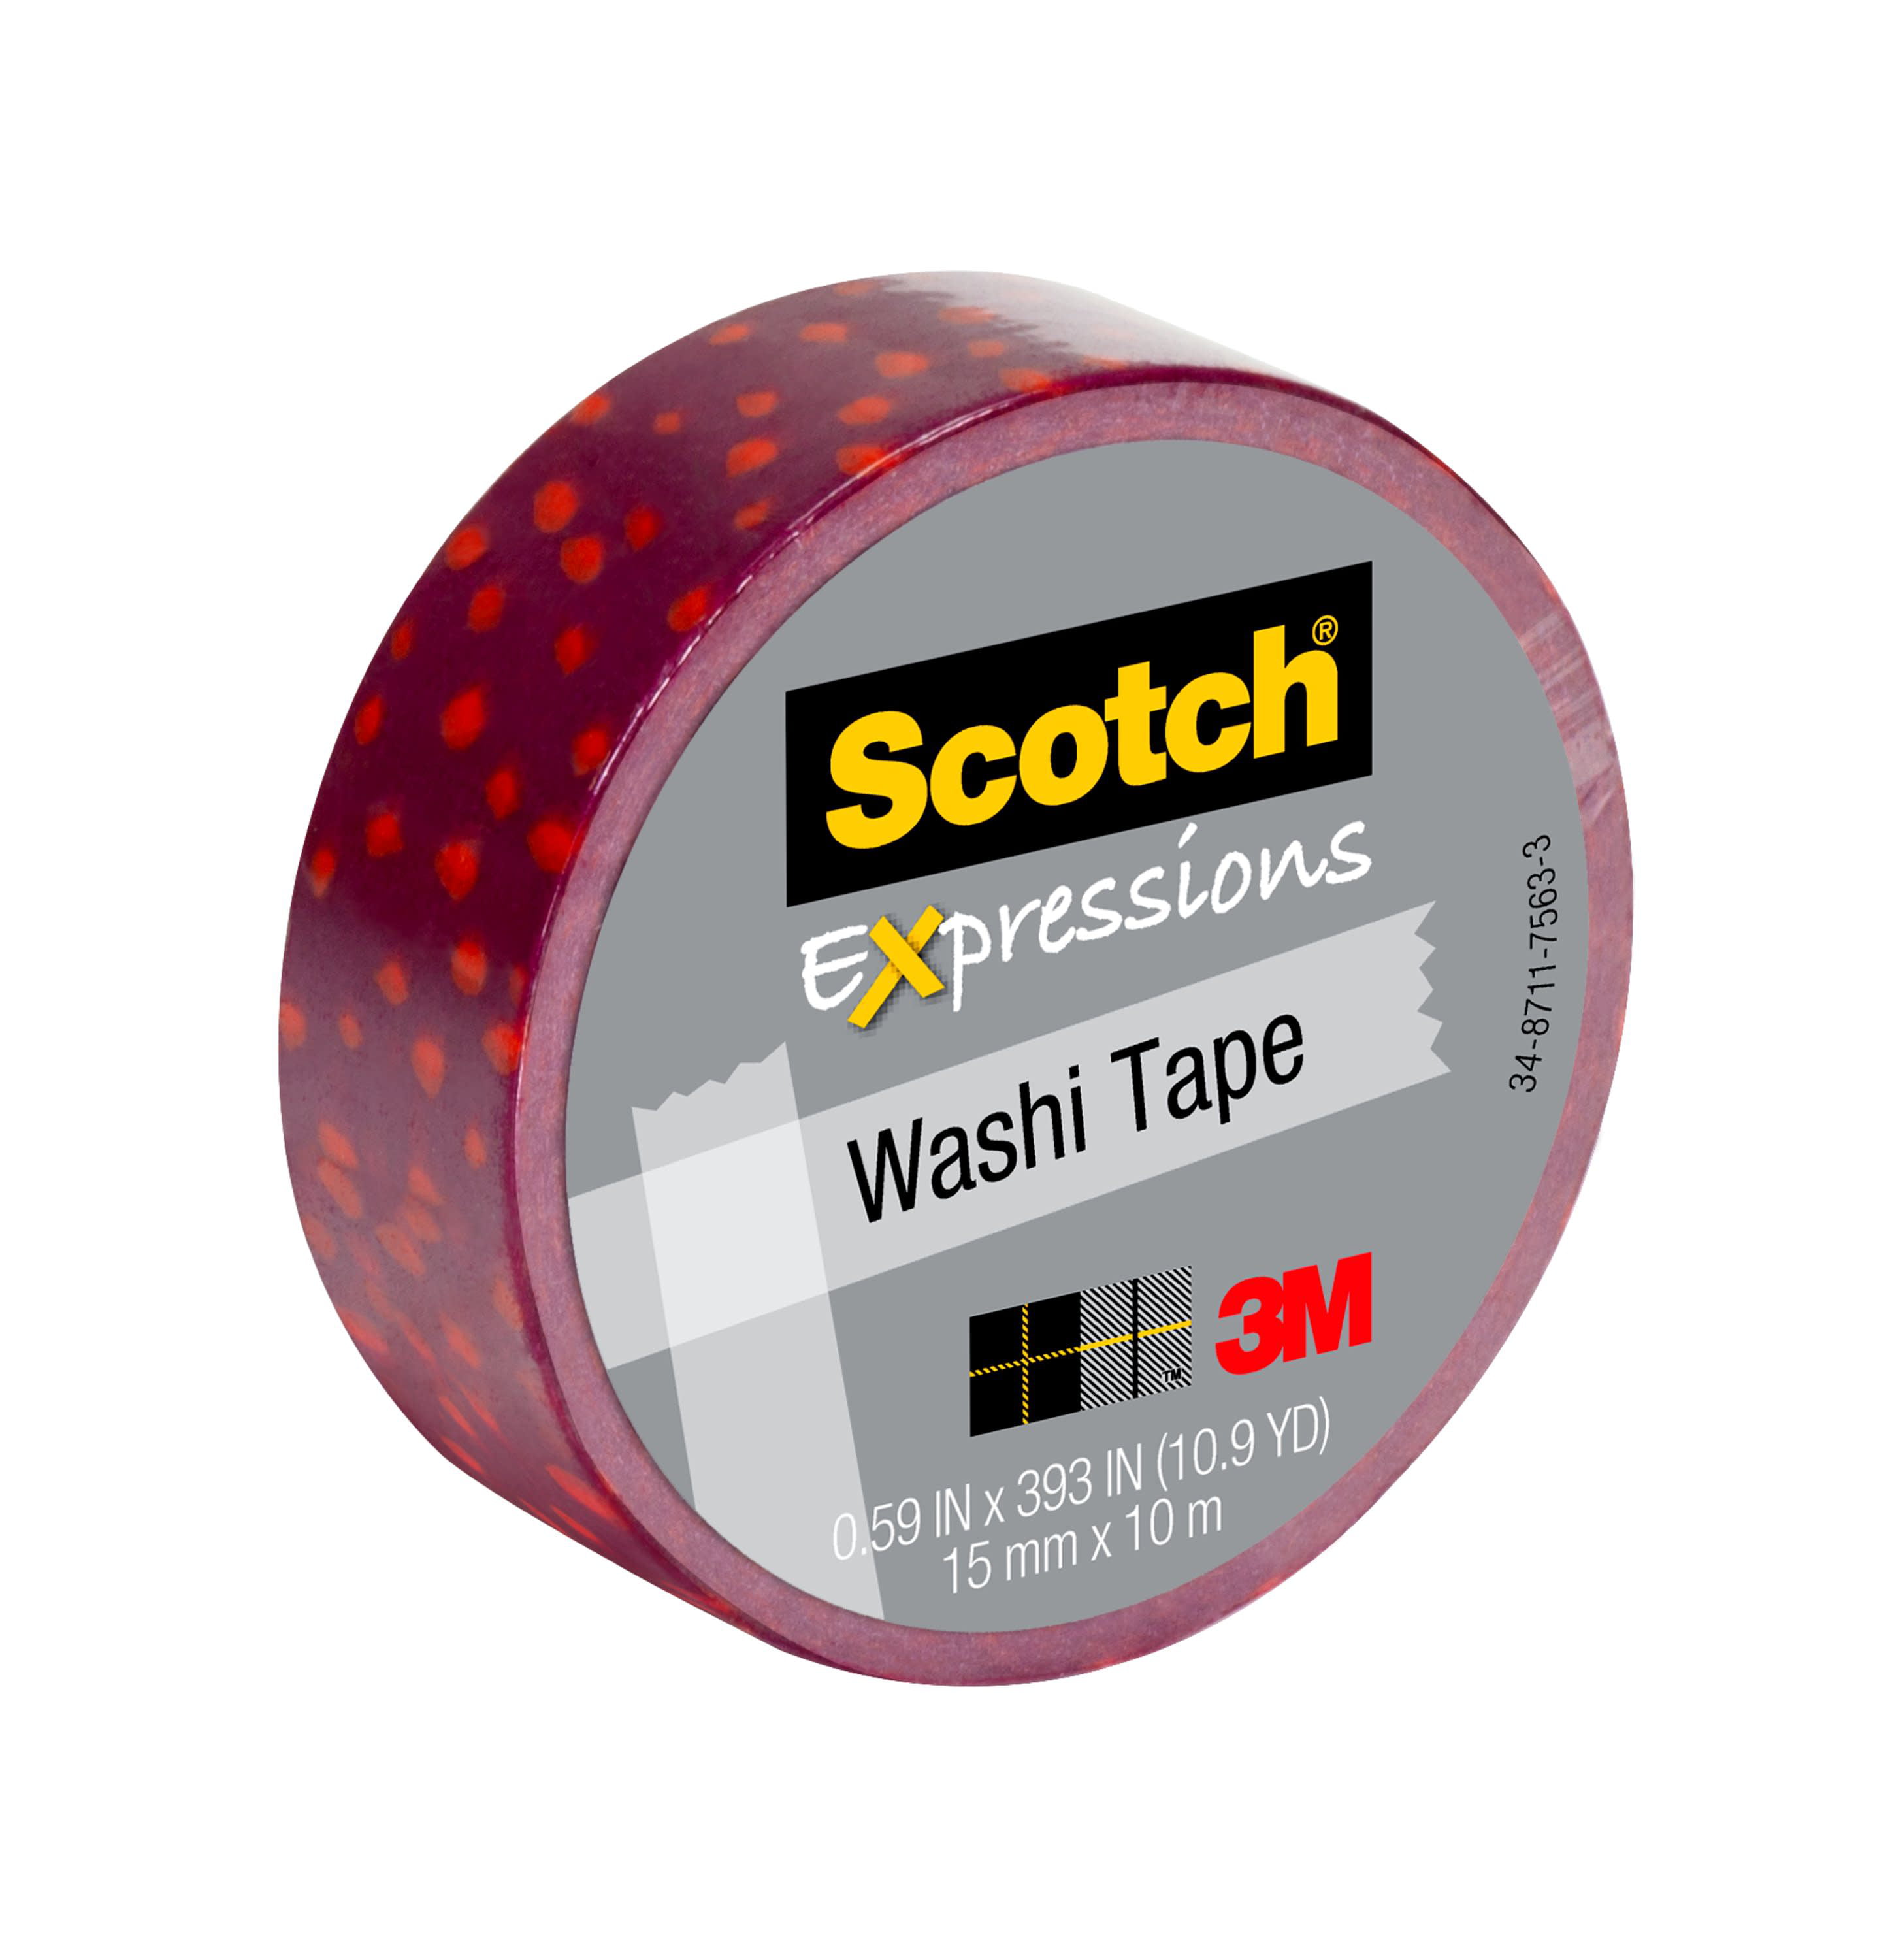 Scotch Expressions Washi Crafting Tape: 0.59 in. x 393 in. (Pink Cupcakes)